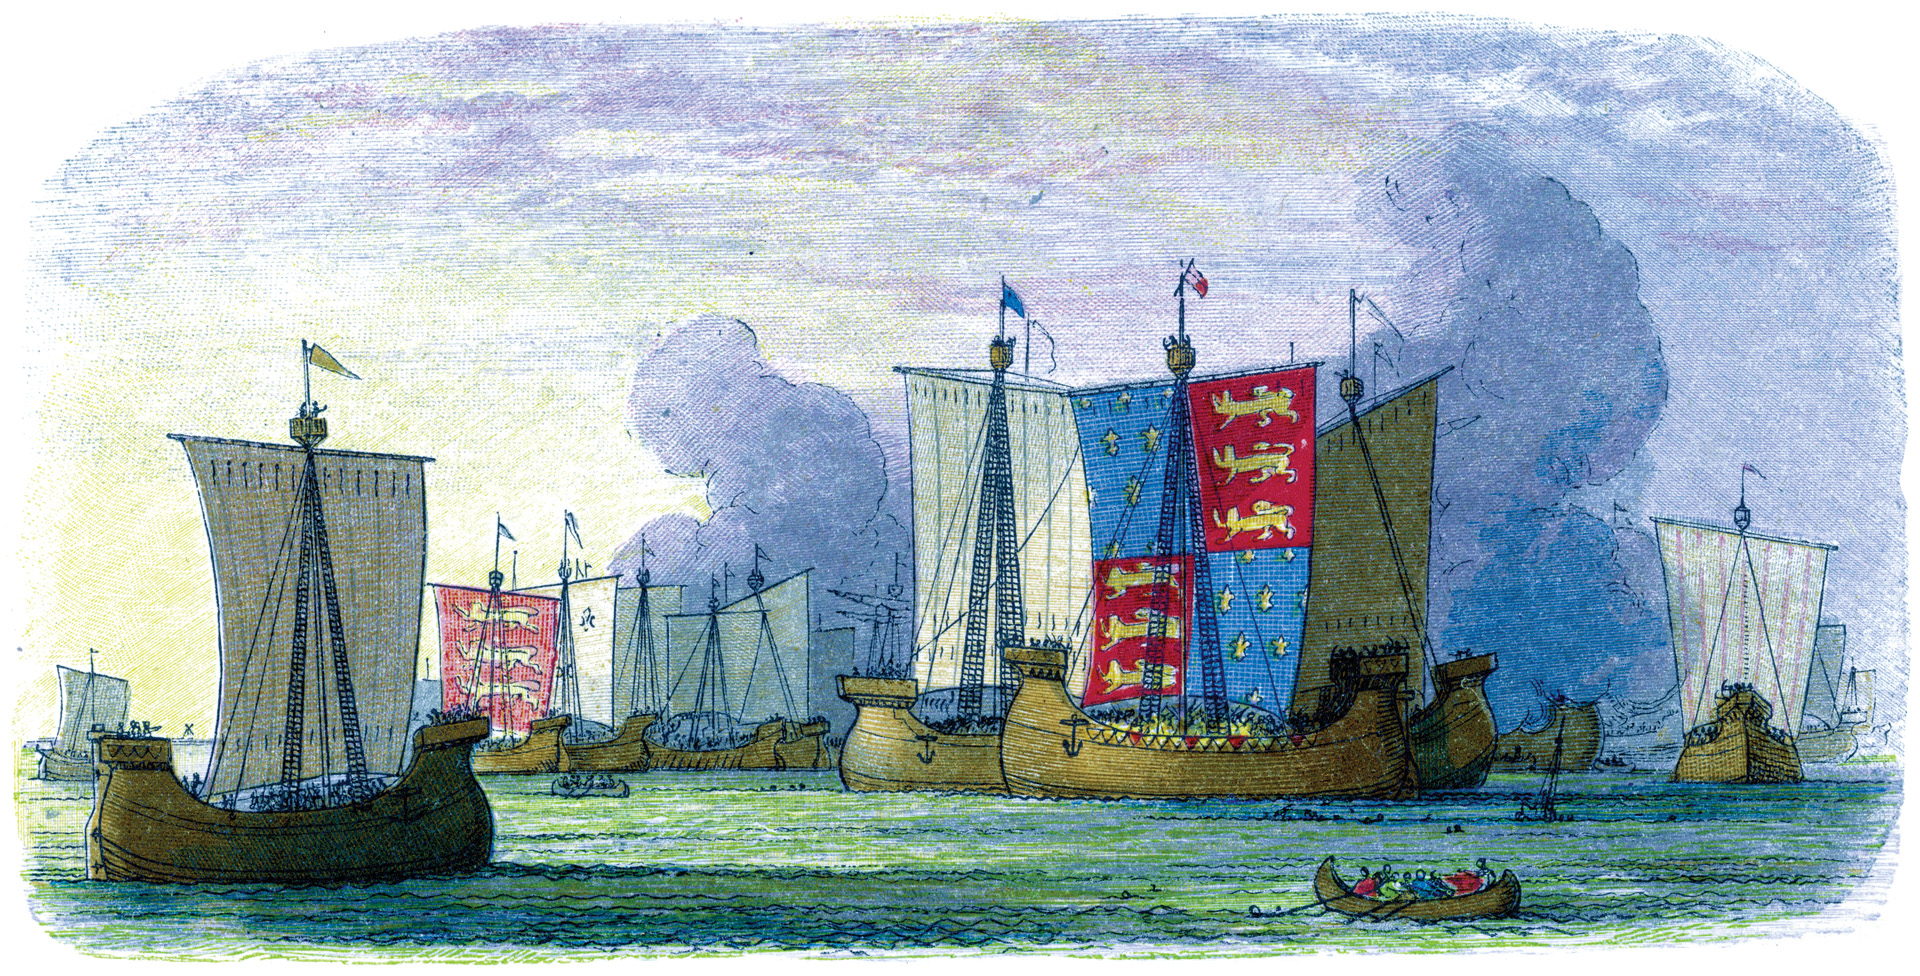 The close quarters fighting at Sluys became desperate given that the soldiers could not flee their vessels. Once the English had defeated the ships in the front line, the Flemish sallied forth from the town and attacked the French from behind.